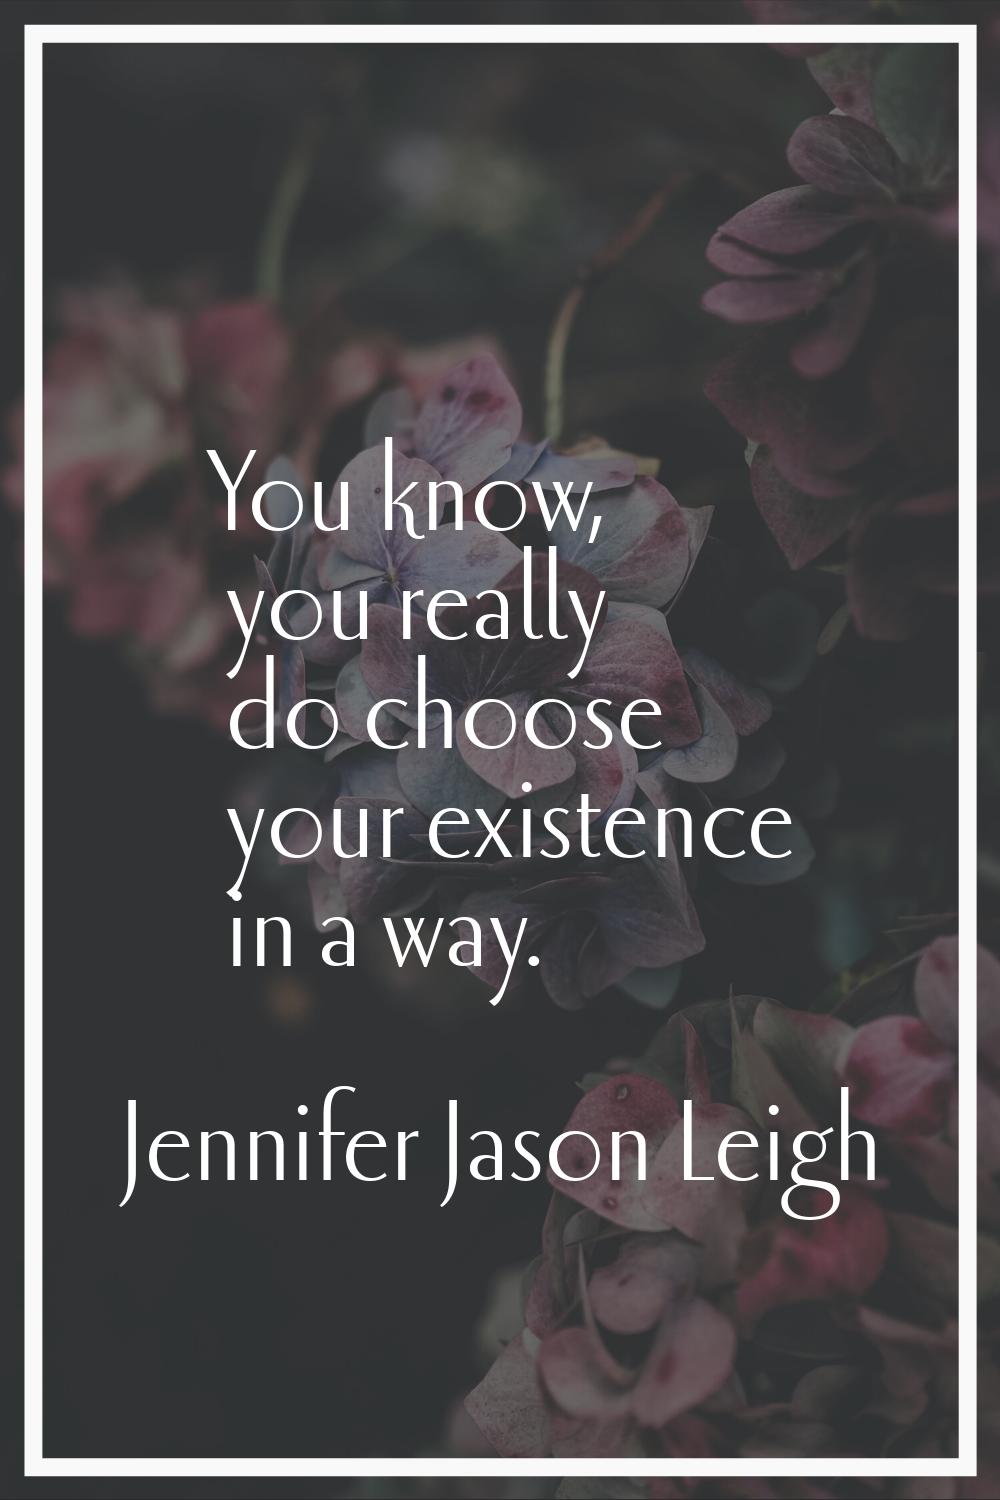 You know, you really do choose your existence in a way.